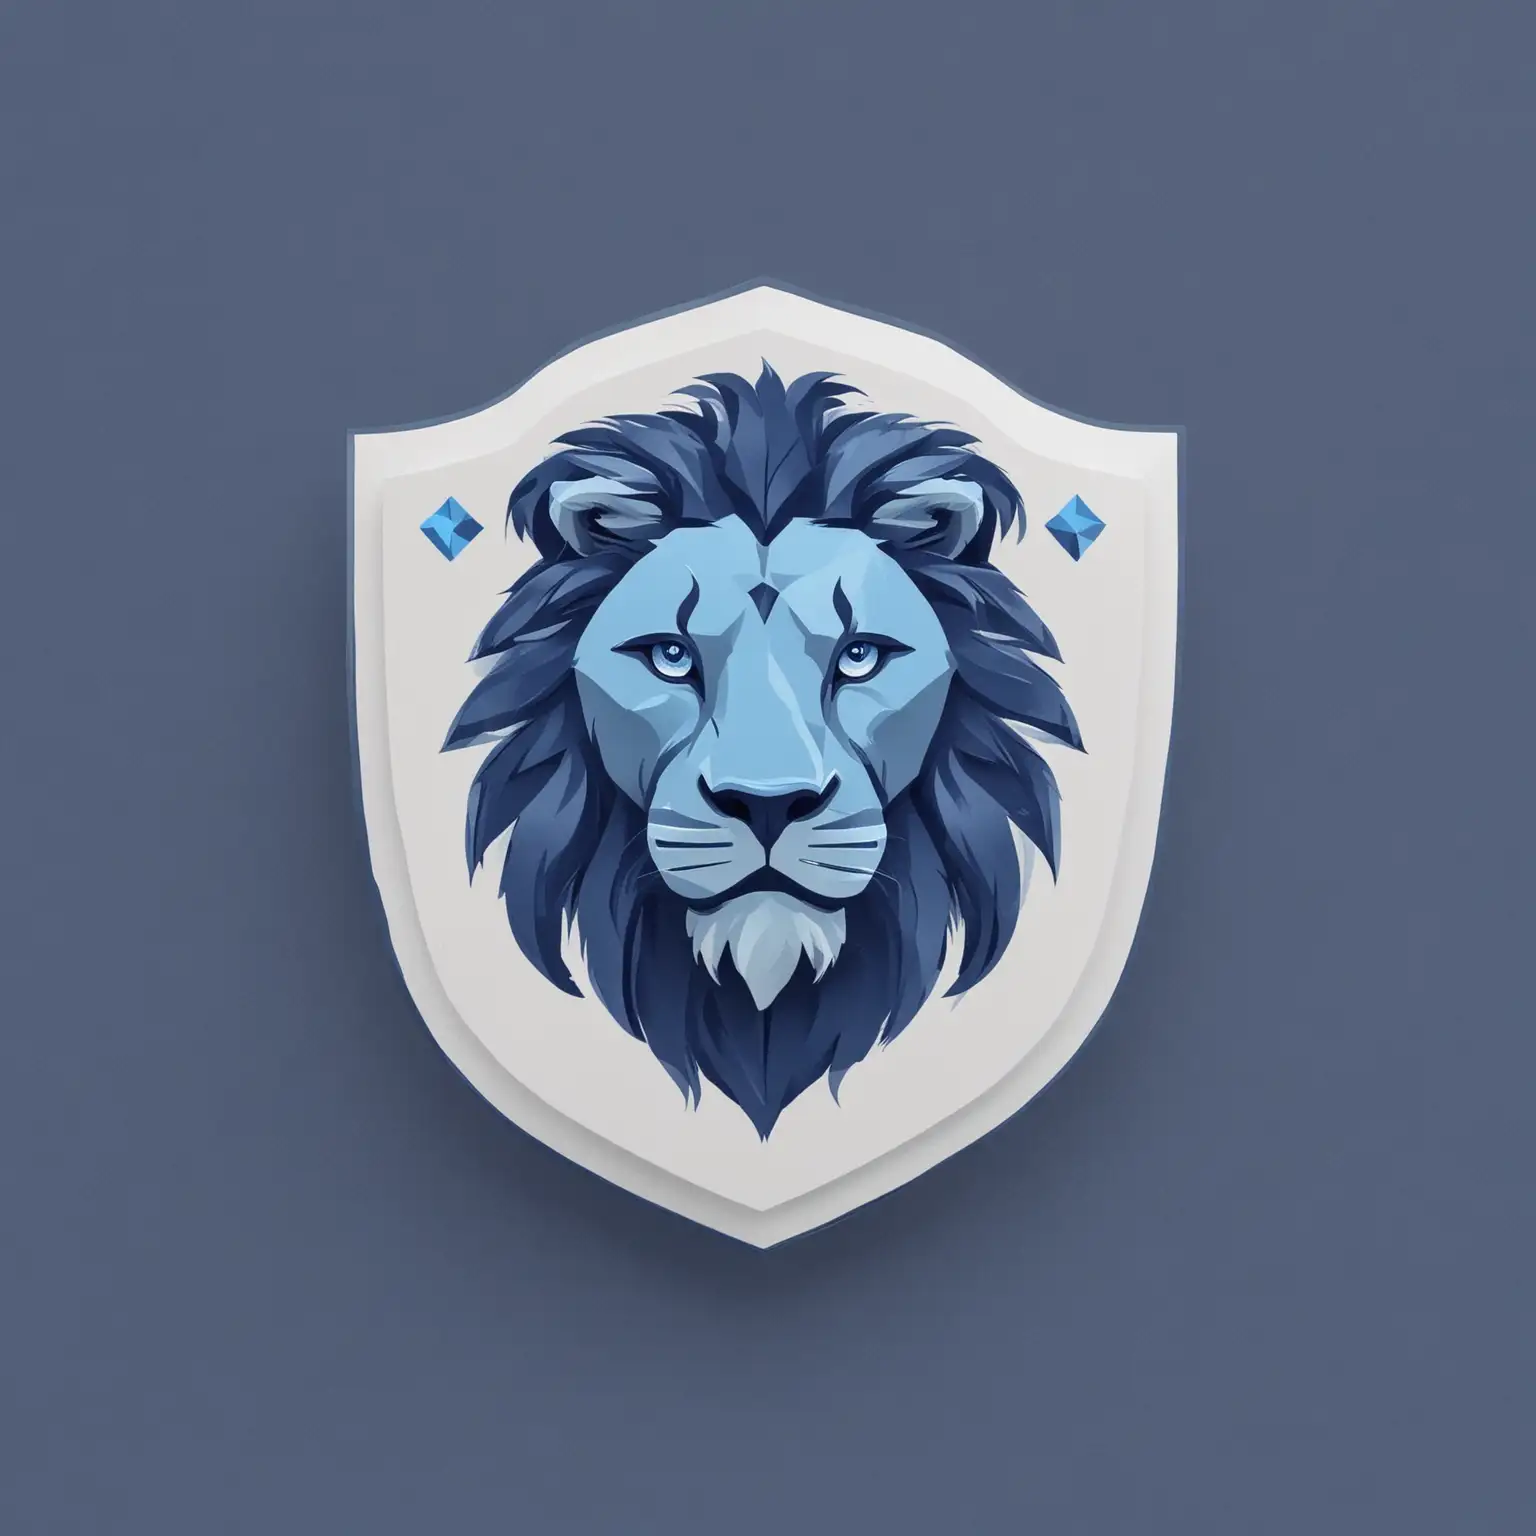 a user experience agency with a blue lion as a logo